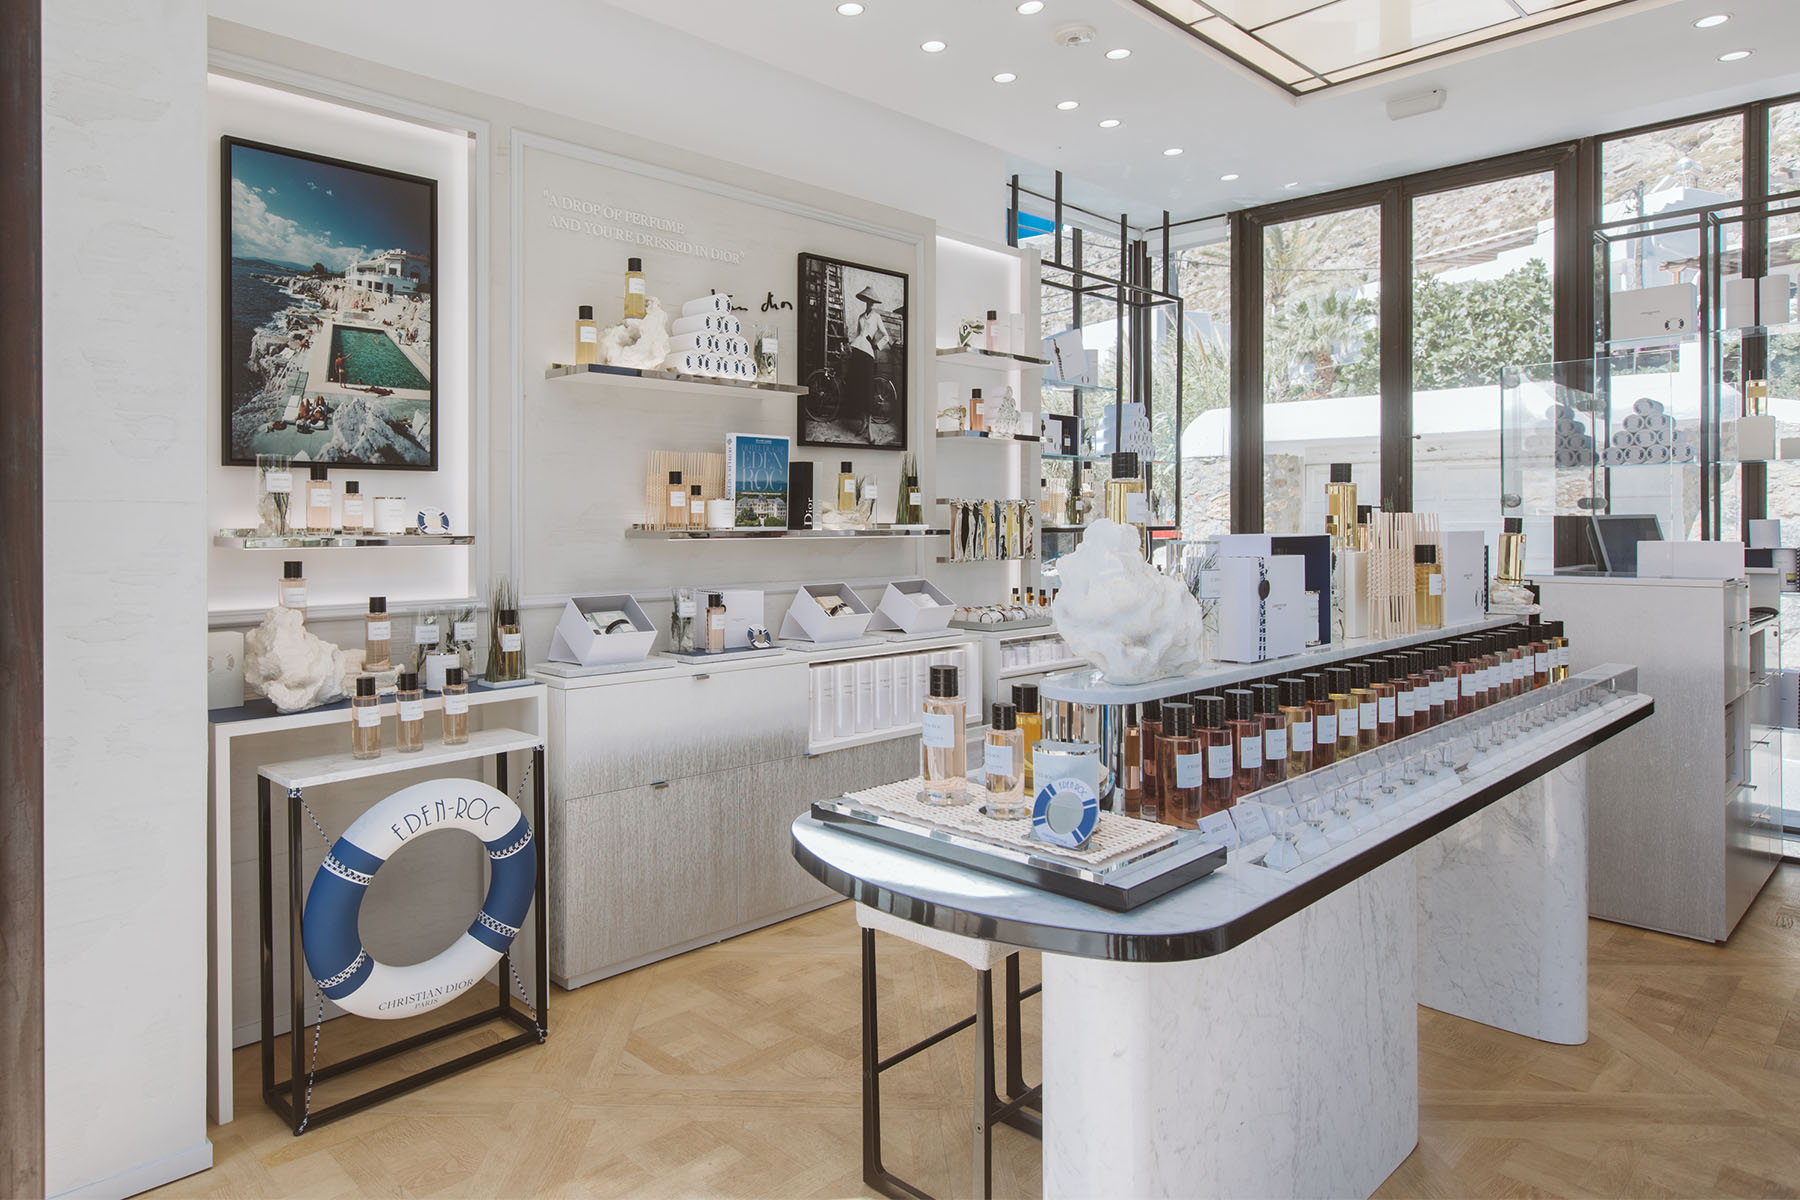 COMMERCIAL STORE OF DIPTYQUE BRAND IN NAMMOS VILLAGE MYKONOS